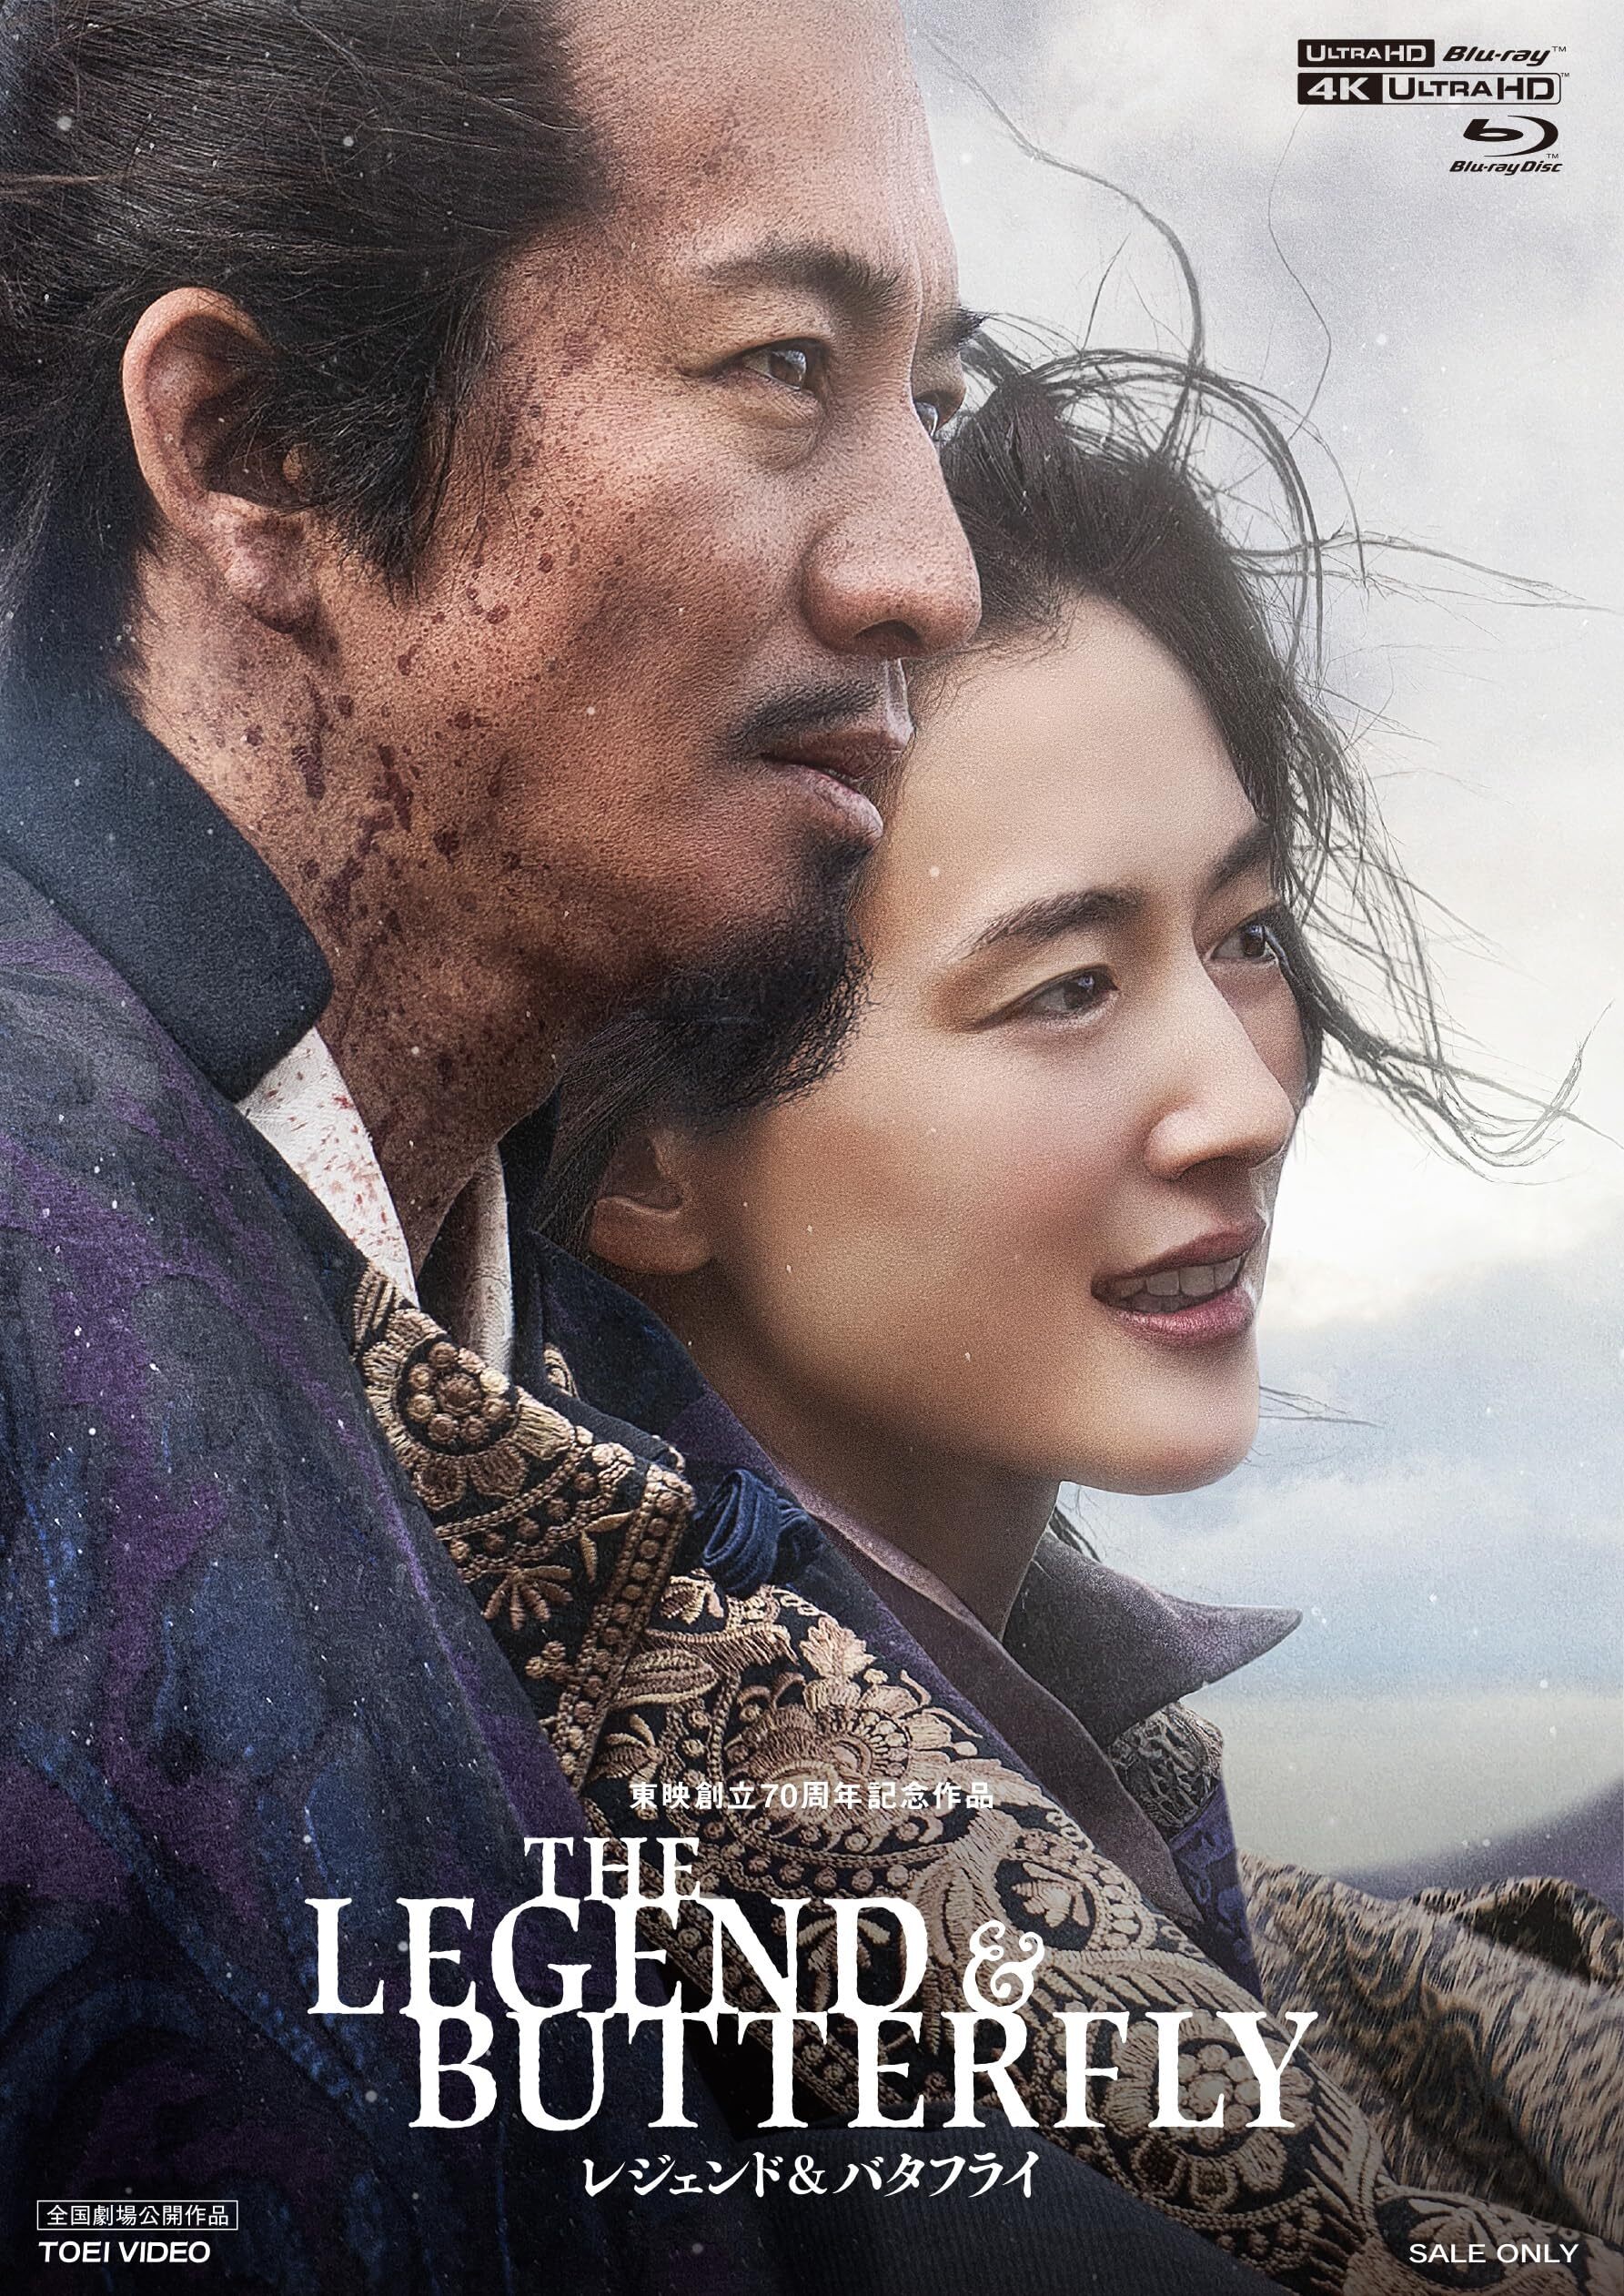 The Legend and Butterfly 4K Blu-ray (レジェンド＆バタフライ) (Japan)